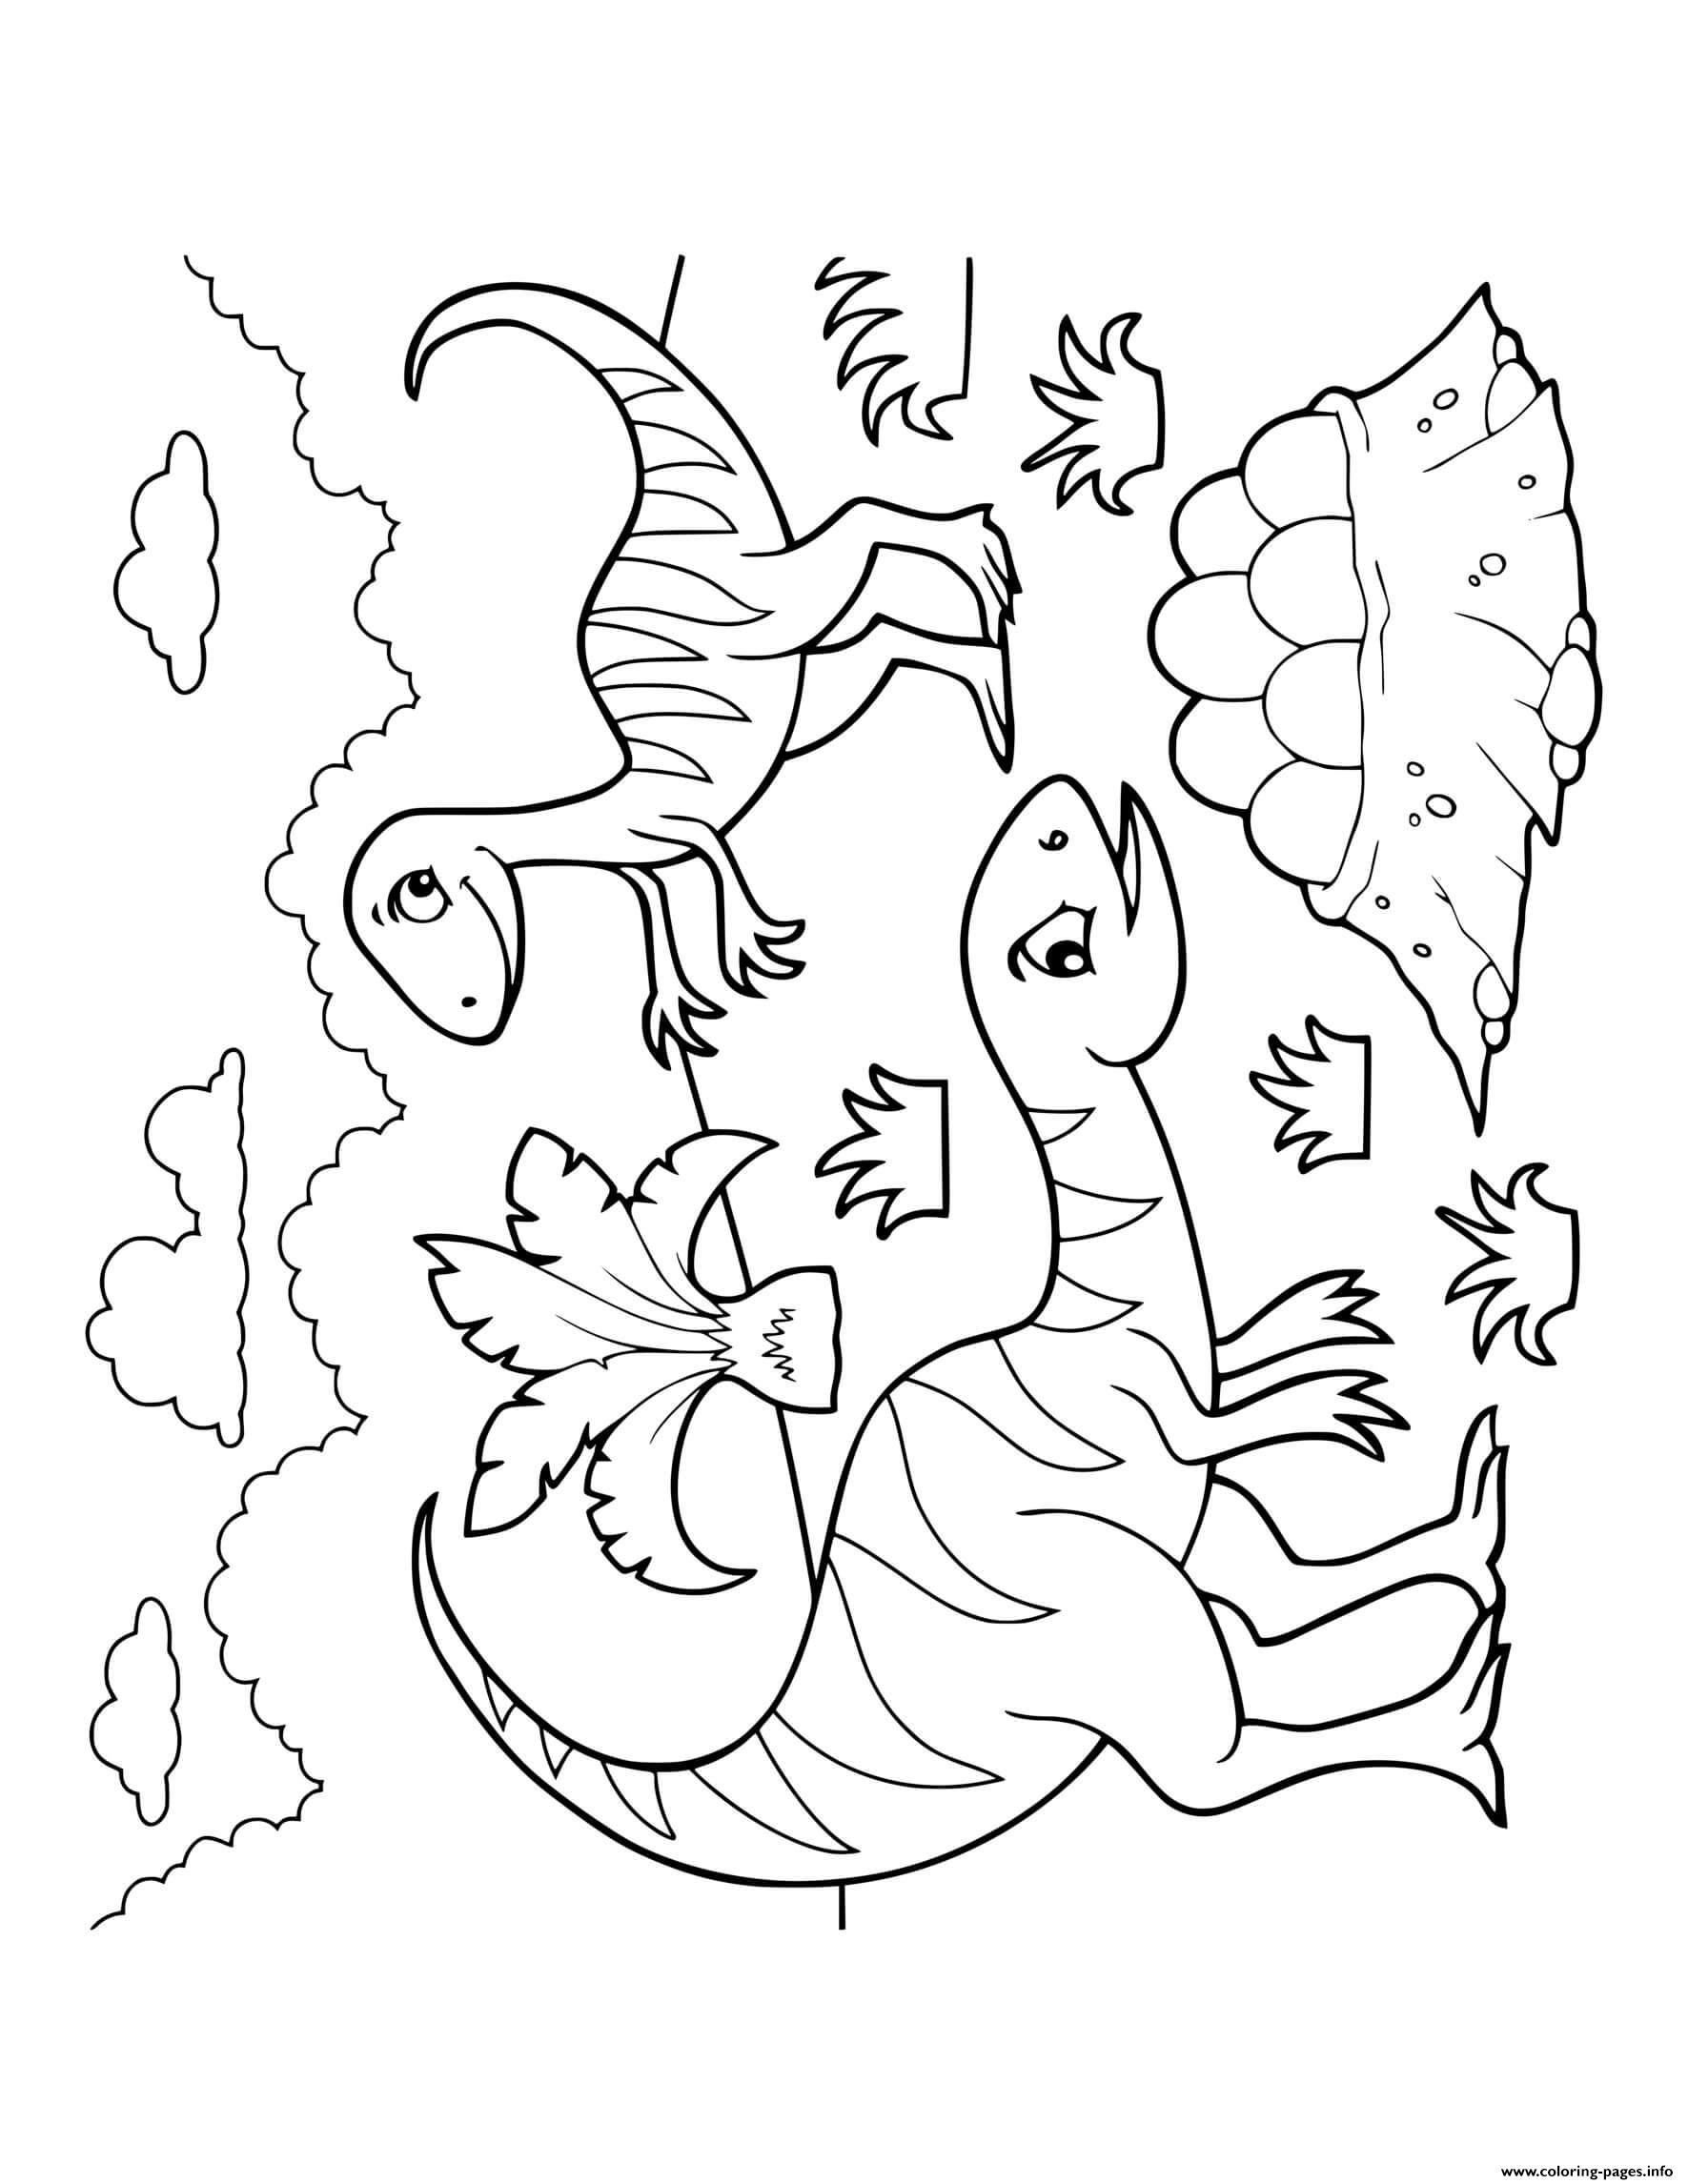 Dinosaur Cartoon Theropods With Nest Of Eggs coloring